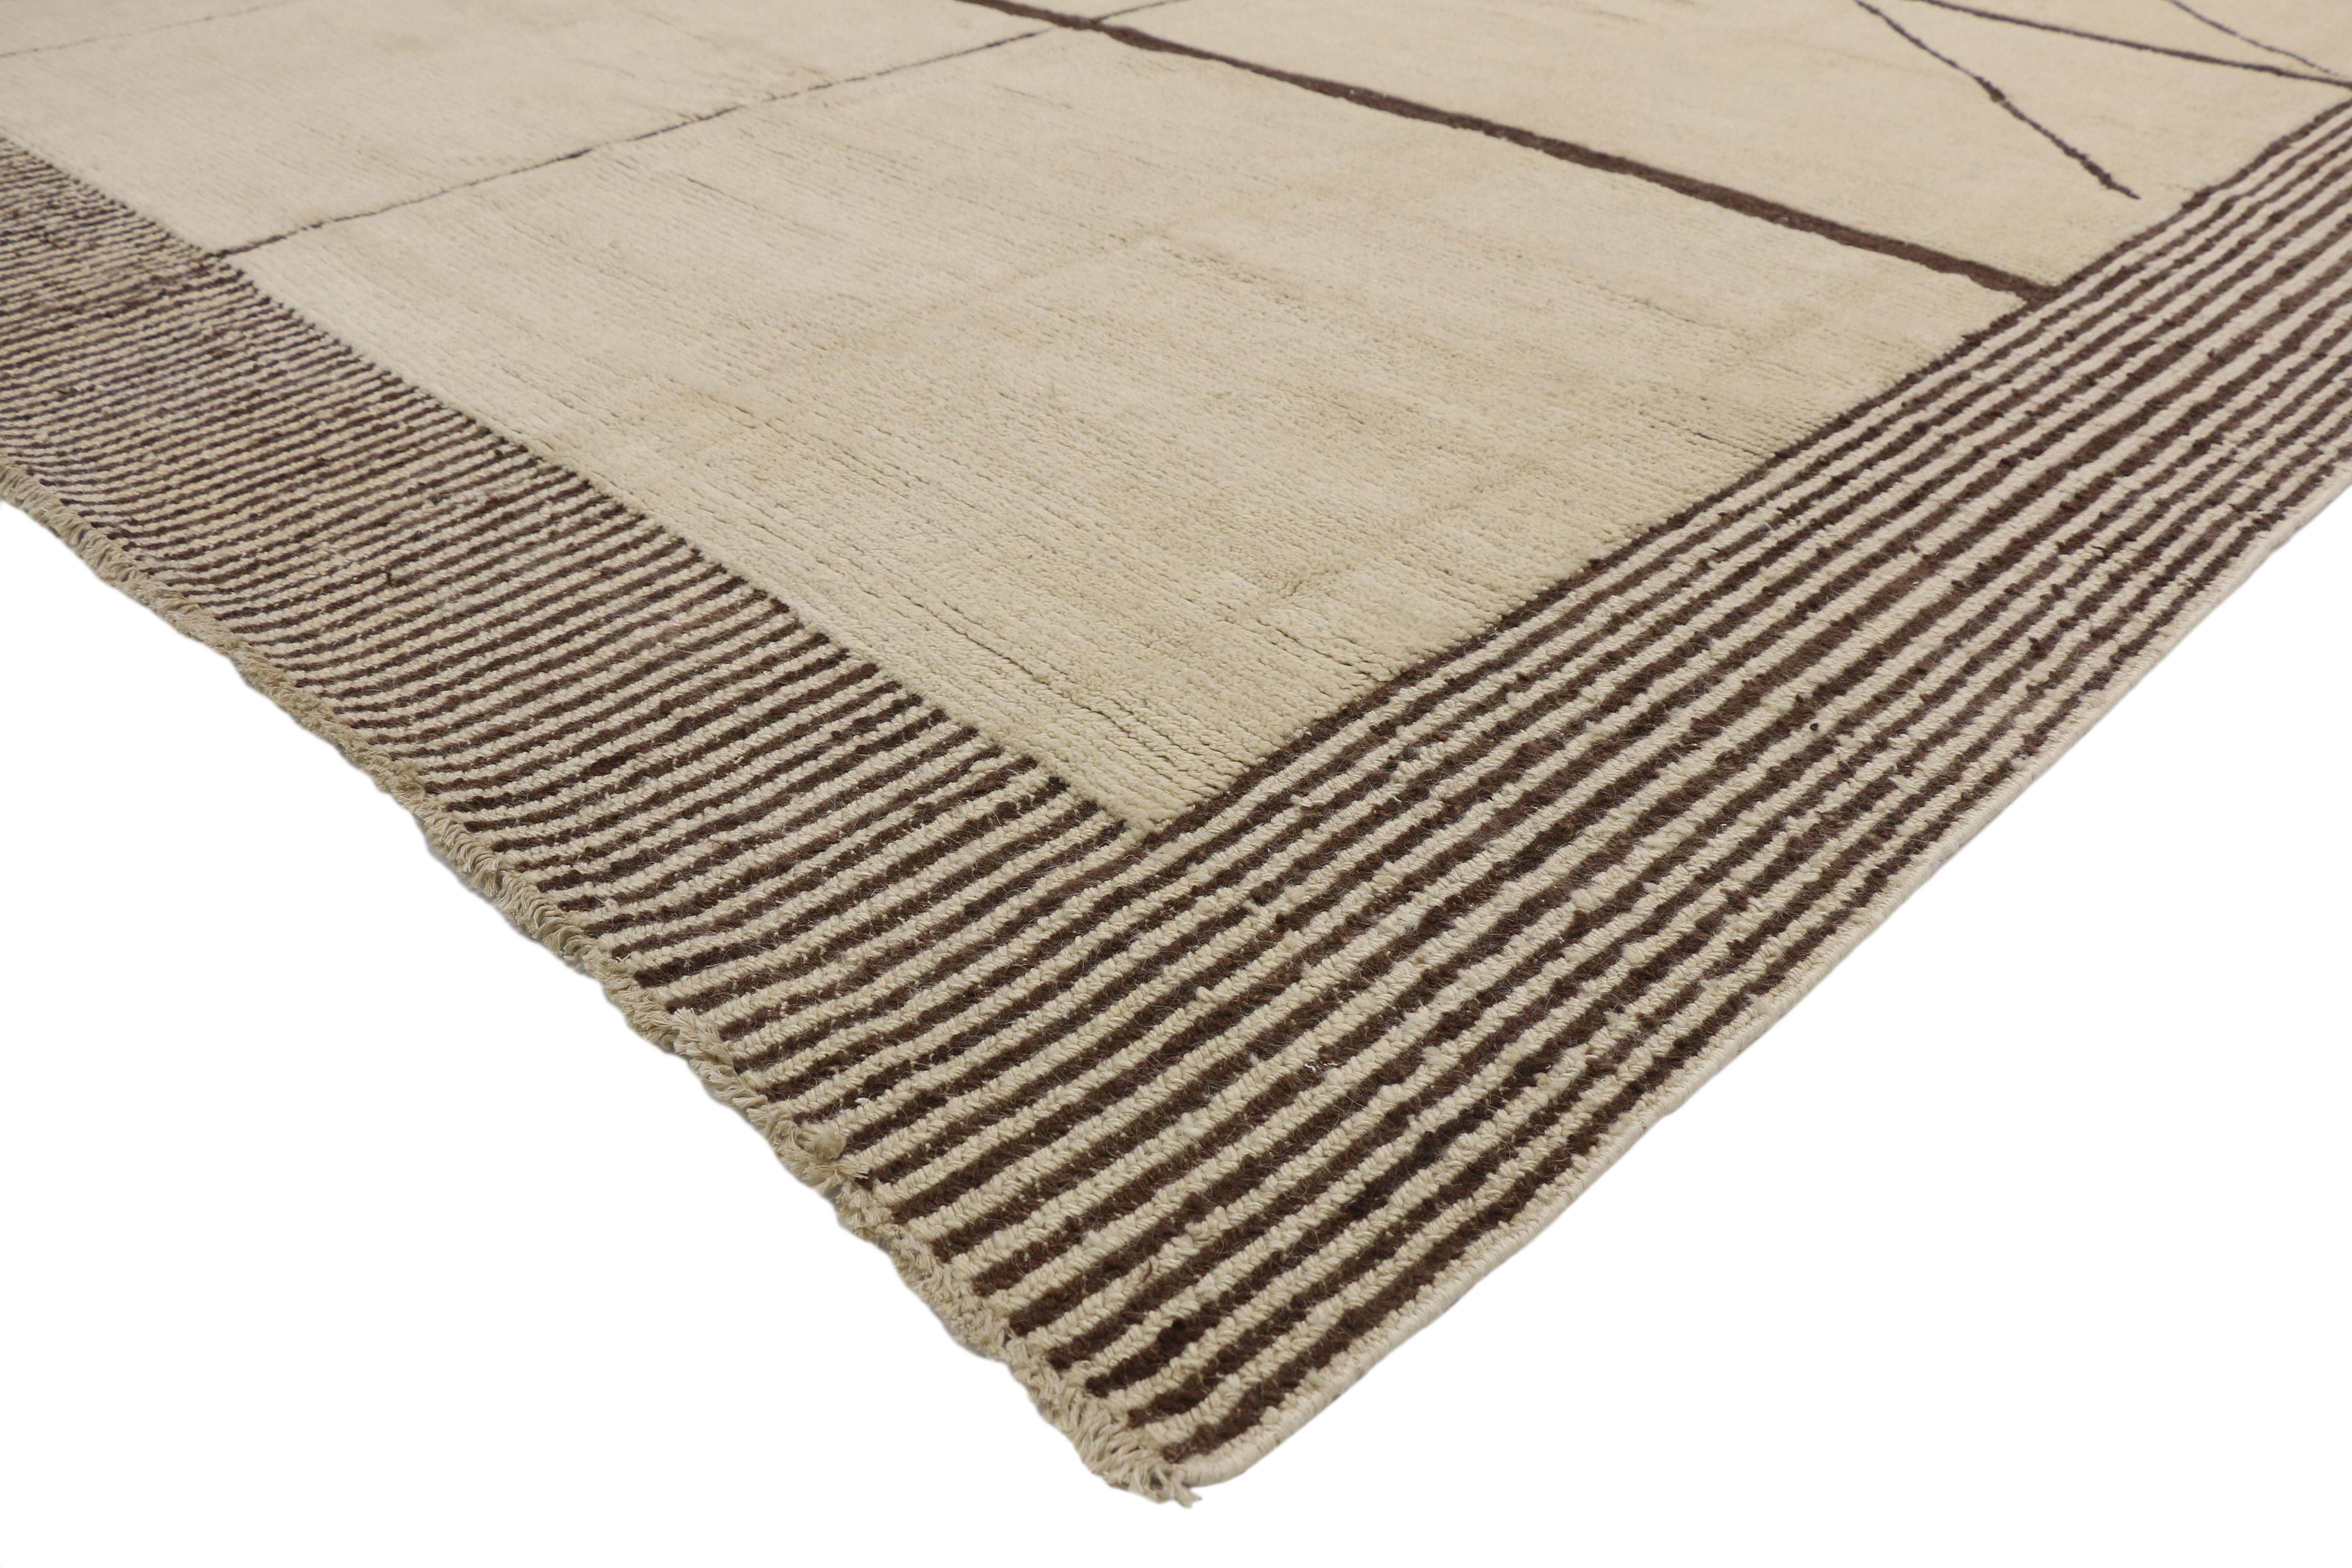 80511, new contemporary Moroccan area rug with organic modern line art style. Organic modern style combined with line art design, this hand knotted wool contemporary Moroccan area rug handsomely displays an asymmetrical geometric pattern. The